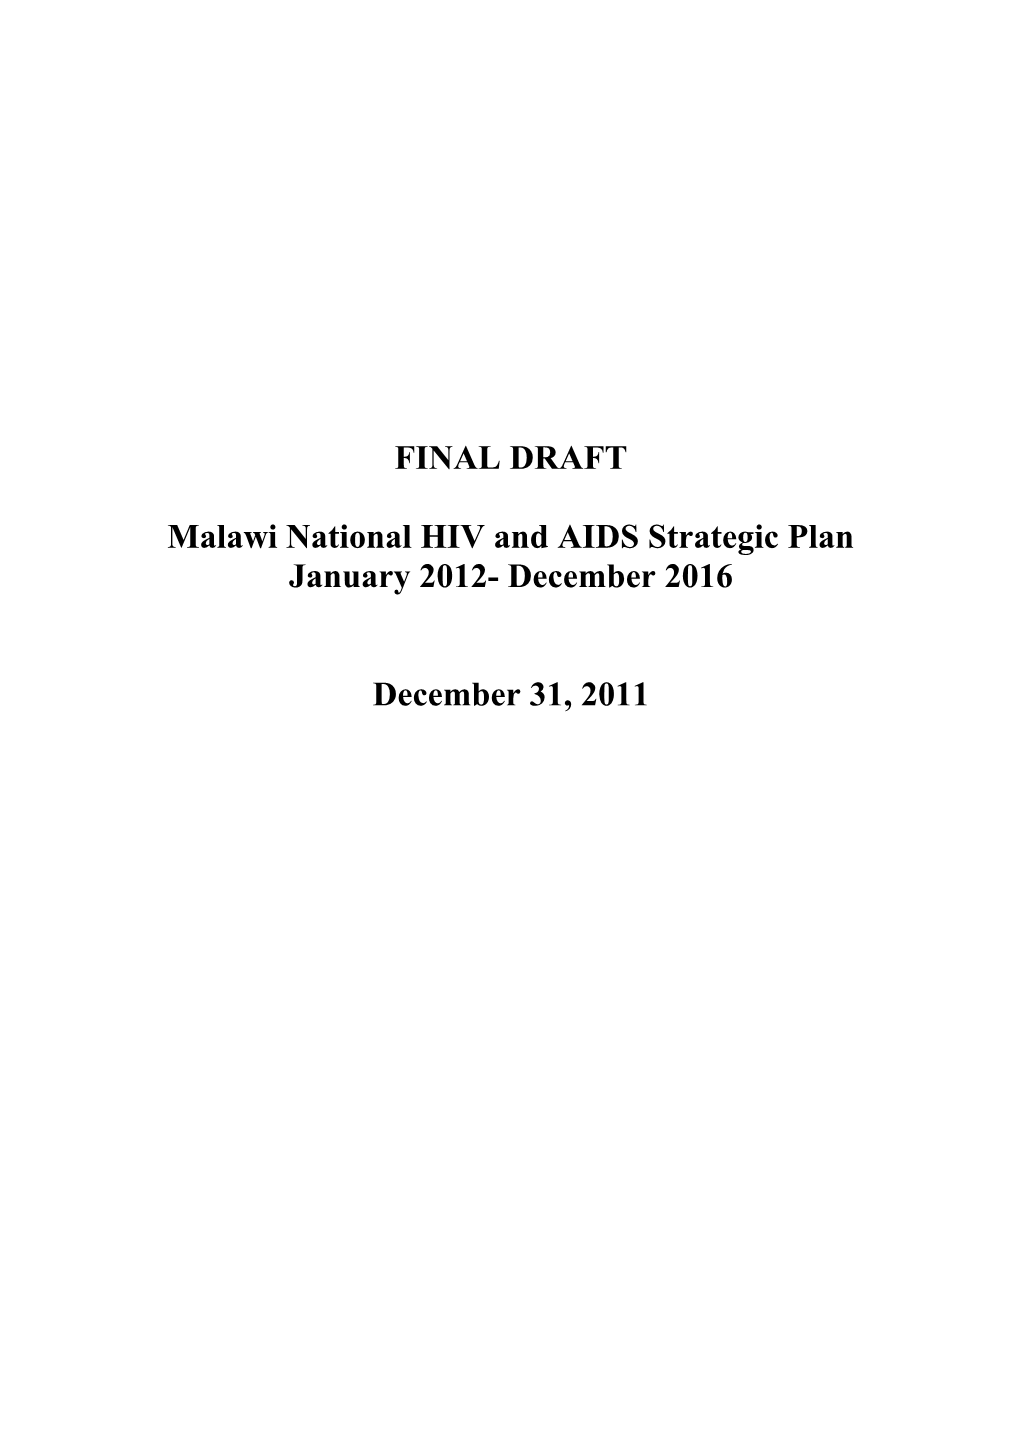 Malawi National HIV and AIDS Strategic Plan January 2012-December 2016